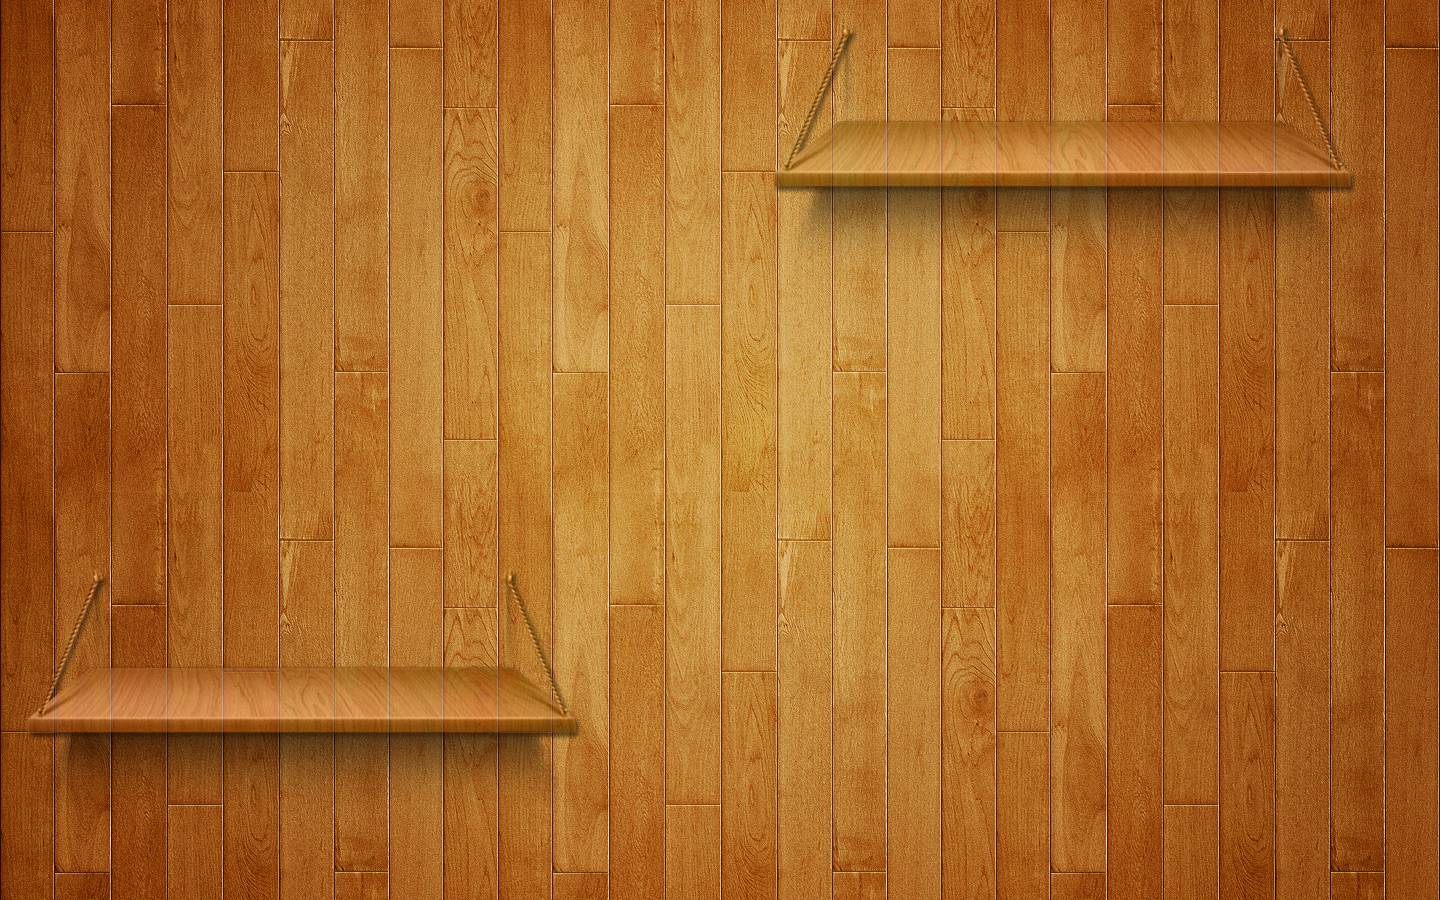 Take A Look At This Wooden Stage Wide Desktop Wallpaper Which